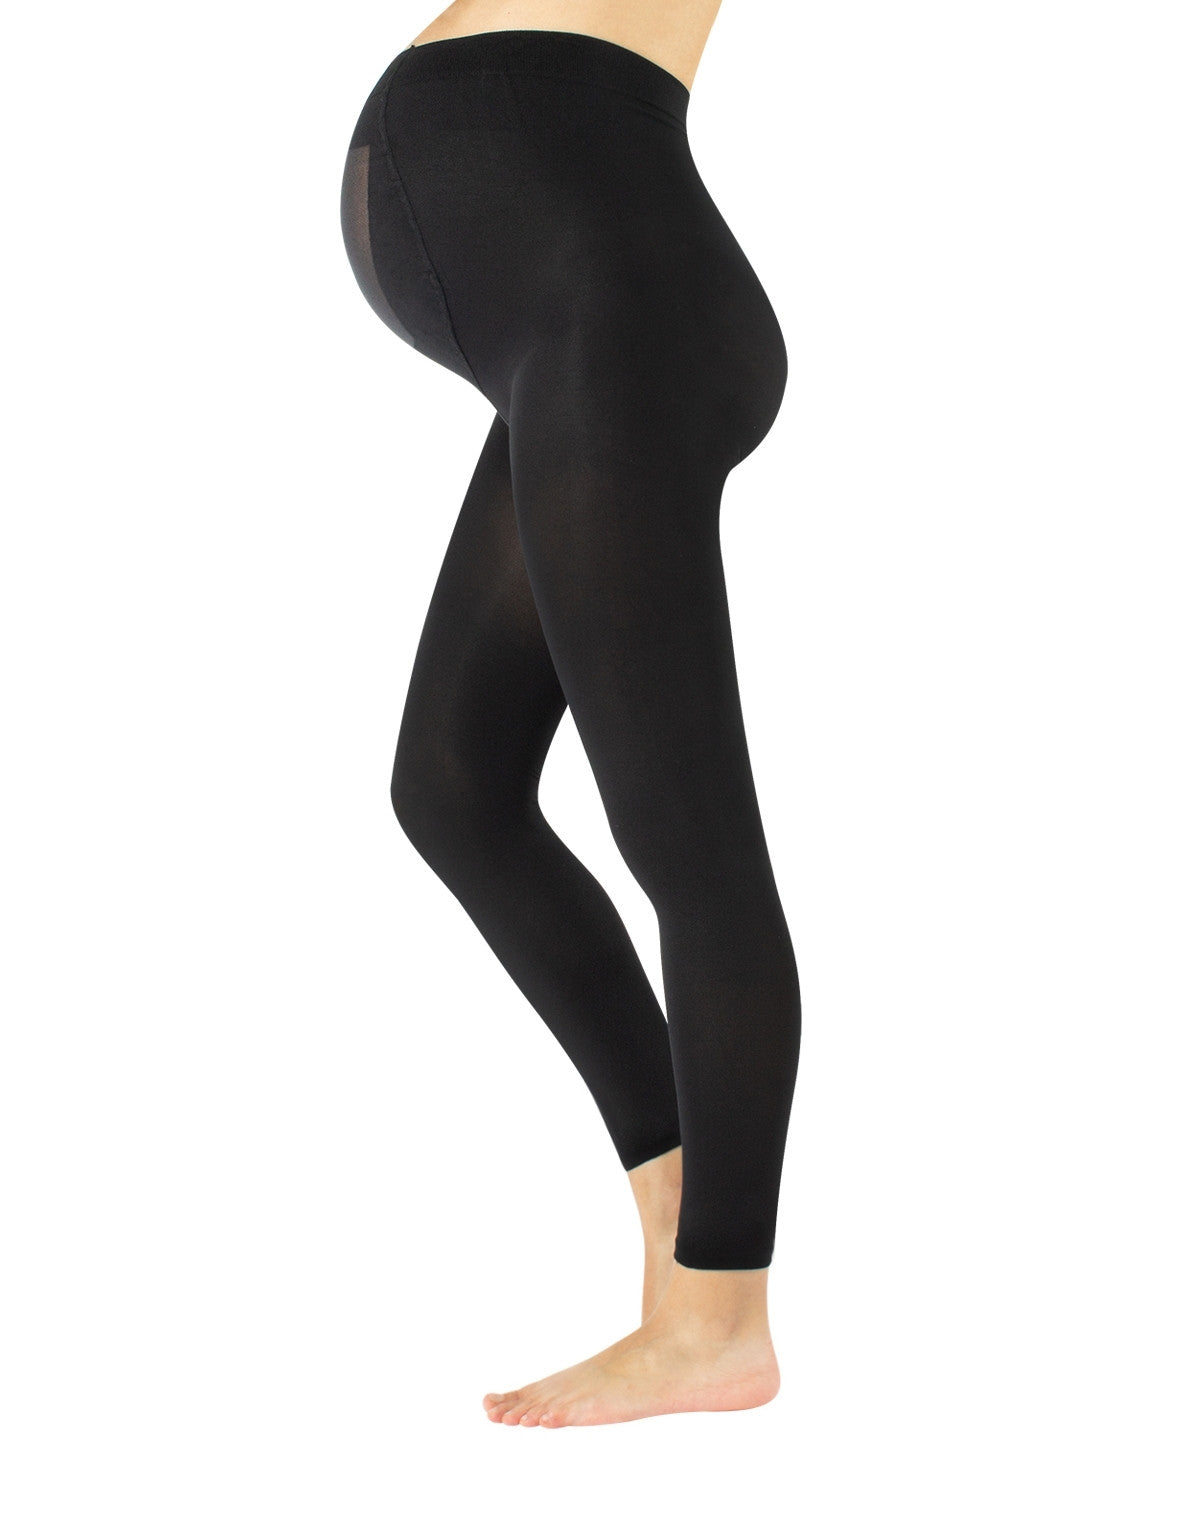 Calzitaly Maternity Footless Tights - Black opaque pregnancy legging tights with a high waist, panelled top to snugly fit over bump flat seams and cotton gusset.